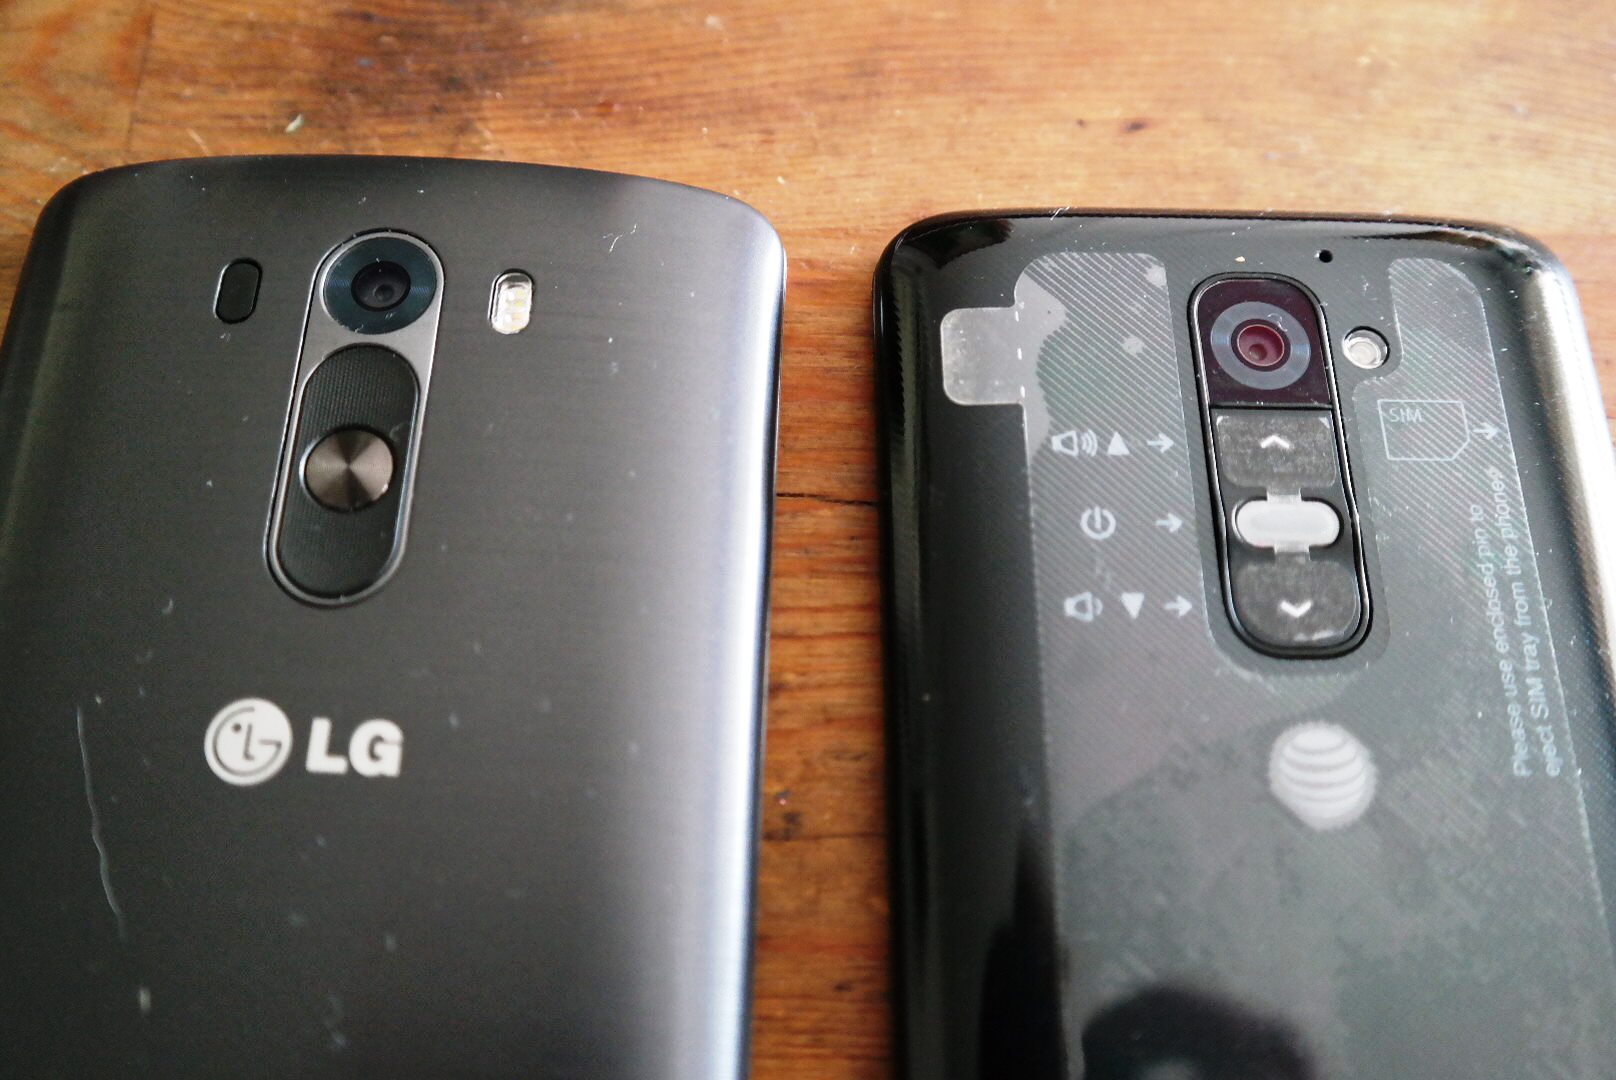 LG G3 Smartphone Review - Simply Innovating #LGG3